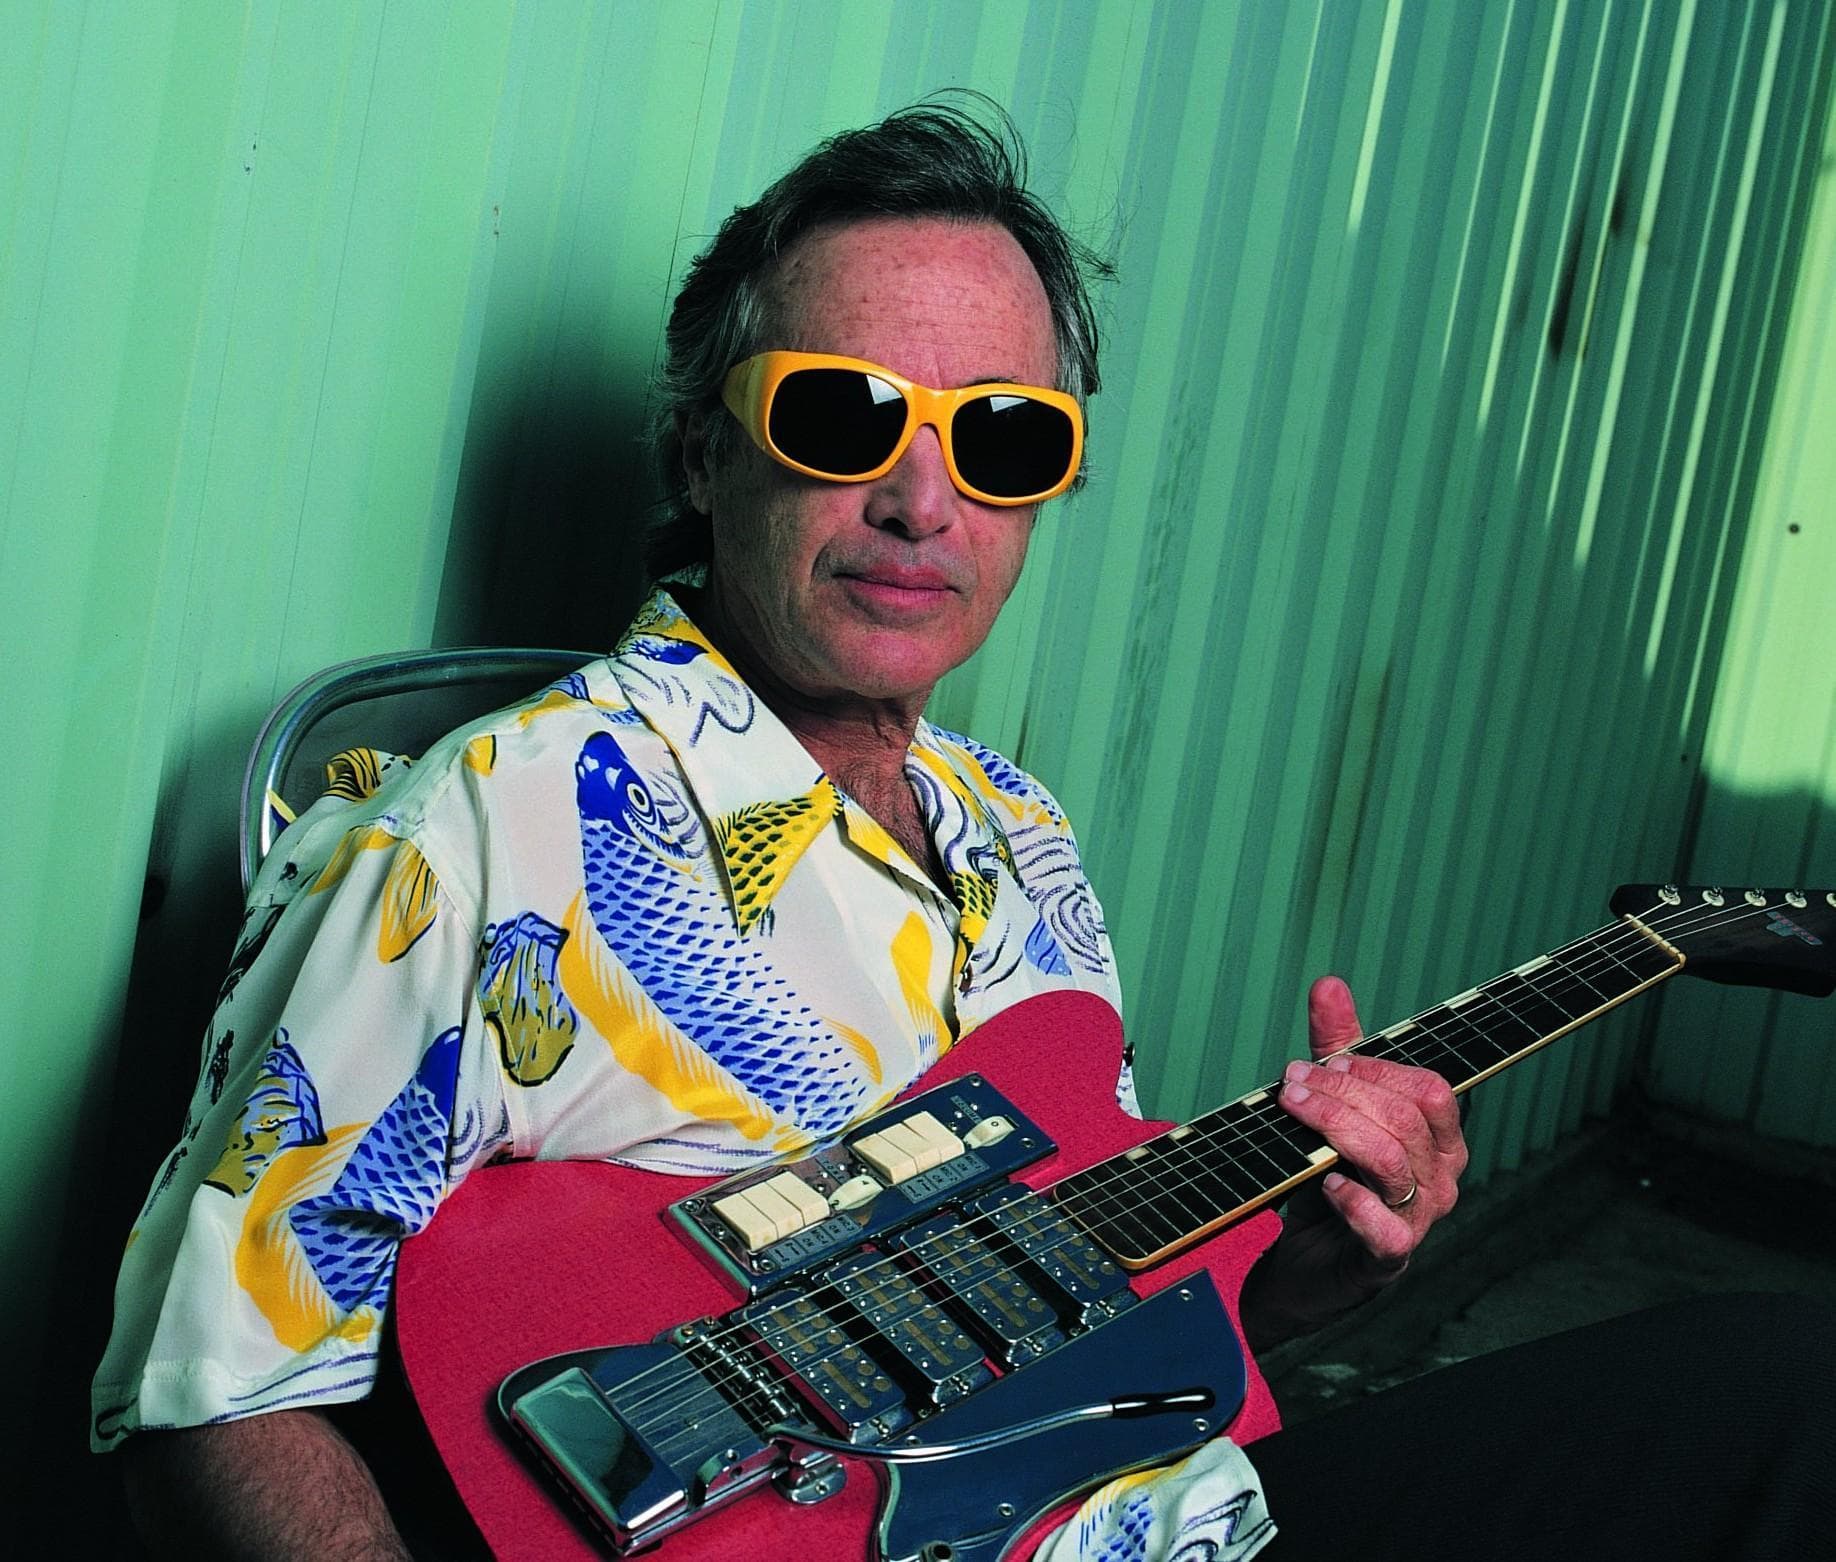 Ry Cooder's Soundtrack For The Financial Crisis Here & Now